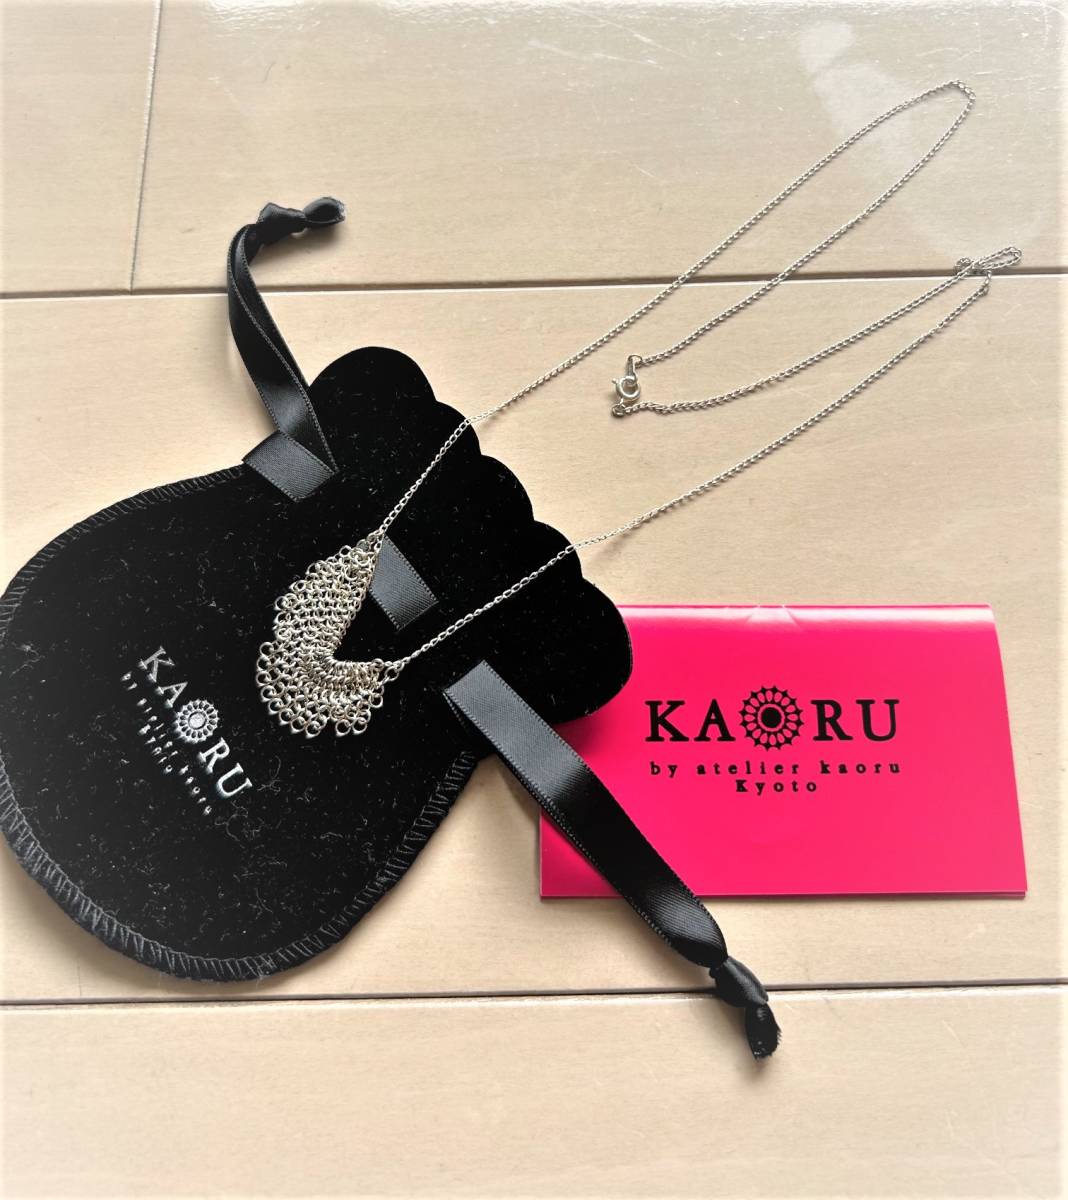  as good as new *KAORU long necklace silver jewelry approximately 64cm marks liekaoru* guarantee * case equipped 